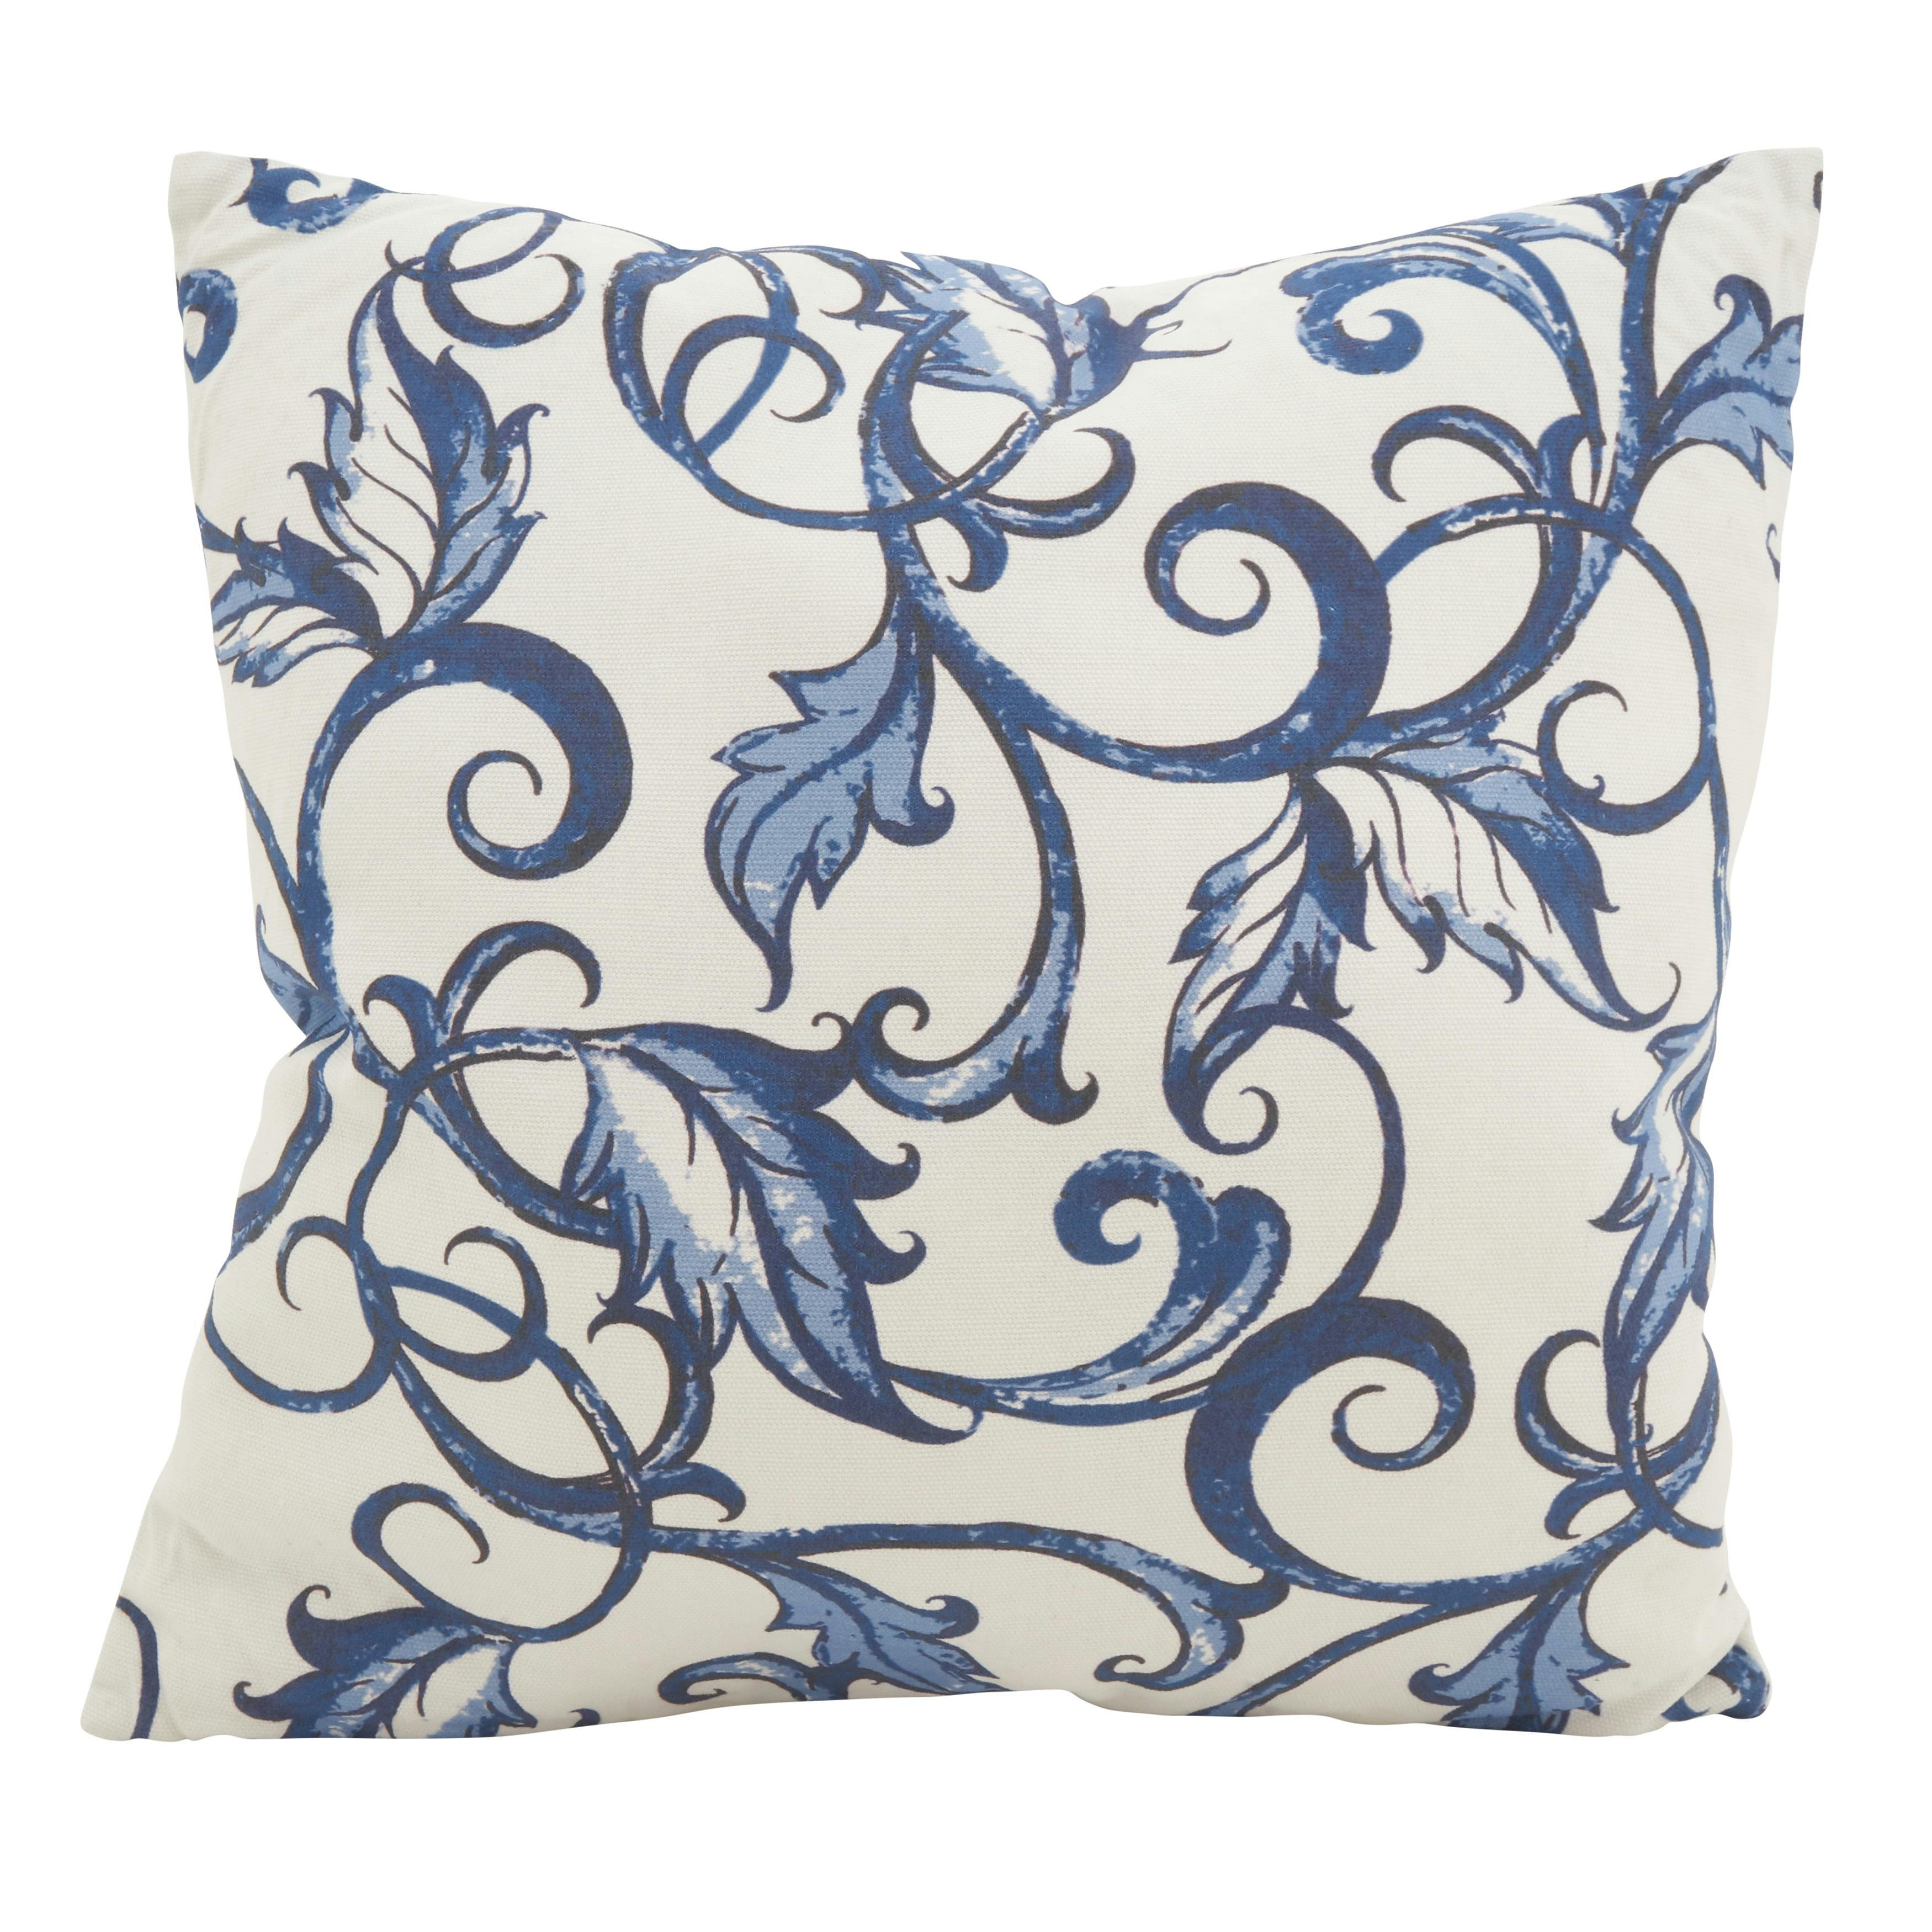 Leaf and Vine 18" Cotton Square Throw Pillow